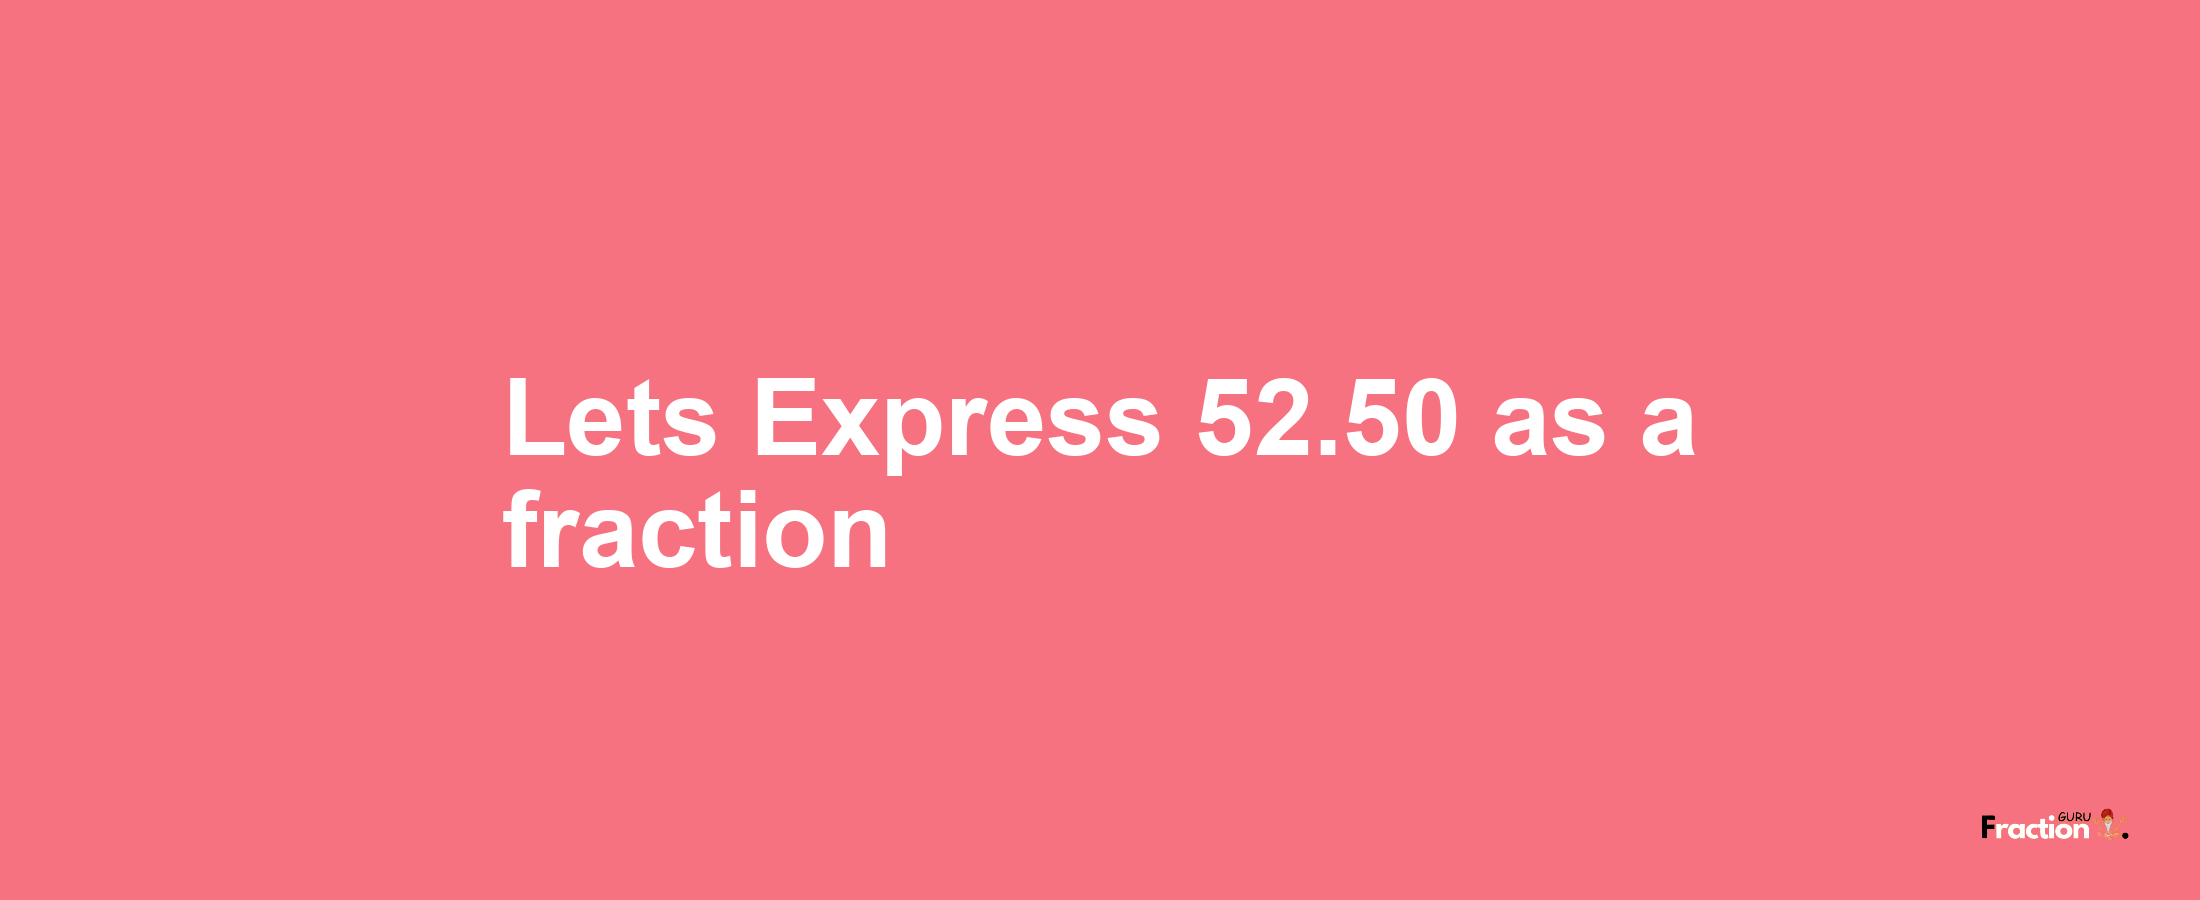 Lets Express 52.50 as afraction